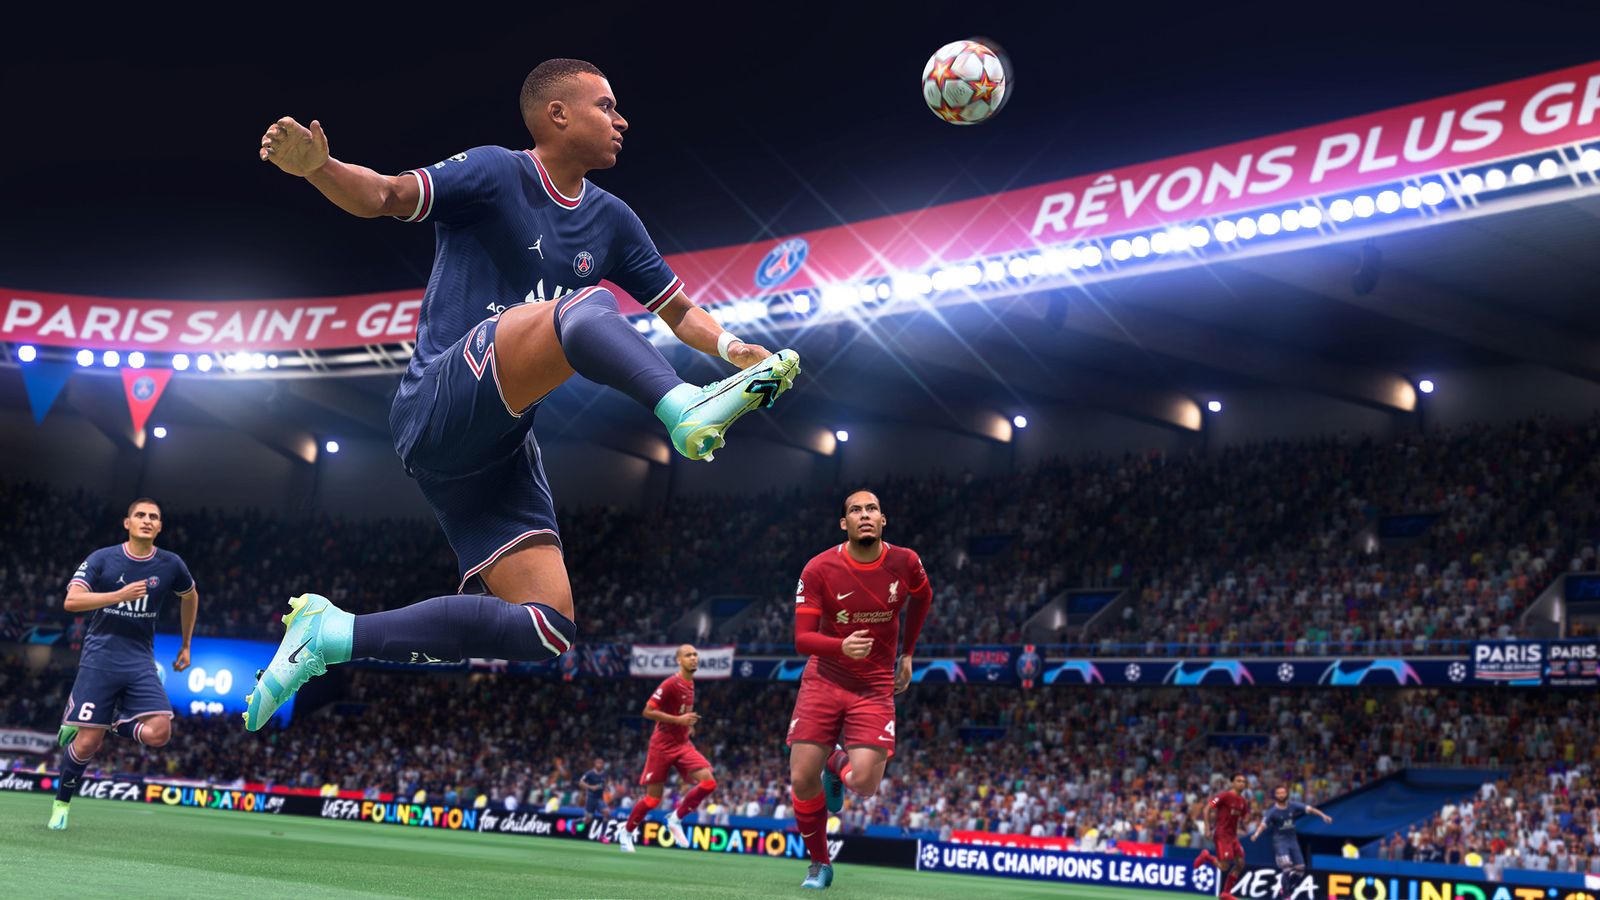 Image of Kylian Mbappé controlling the ball in FIFA 22.